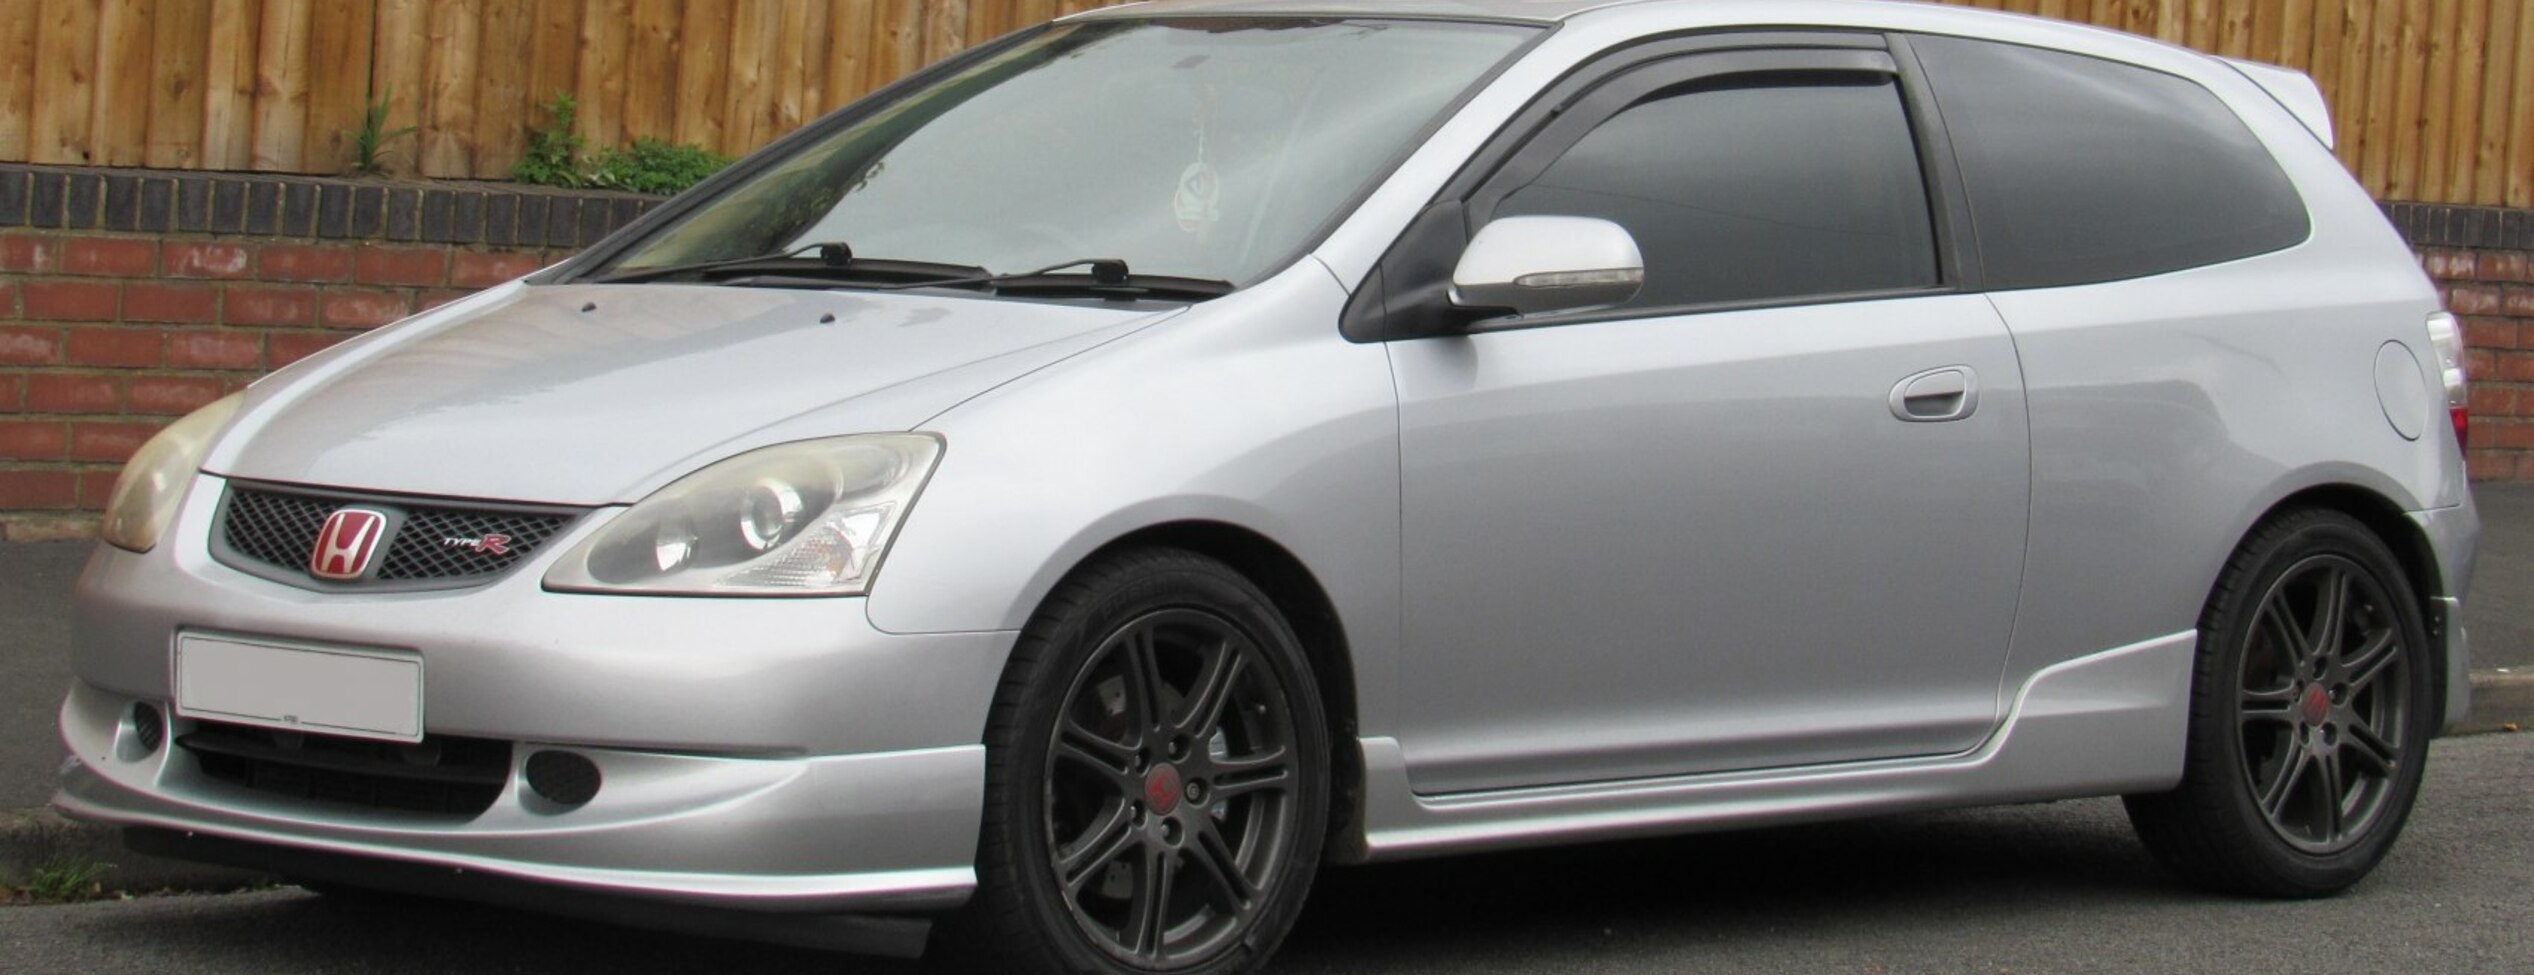 Honda Civic VII Hatchback  16V (90 Hp) 2001, 2002, 2003, 2004, 2005  specifications, prices & reviews | XEZii